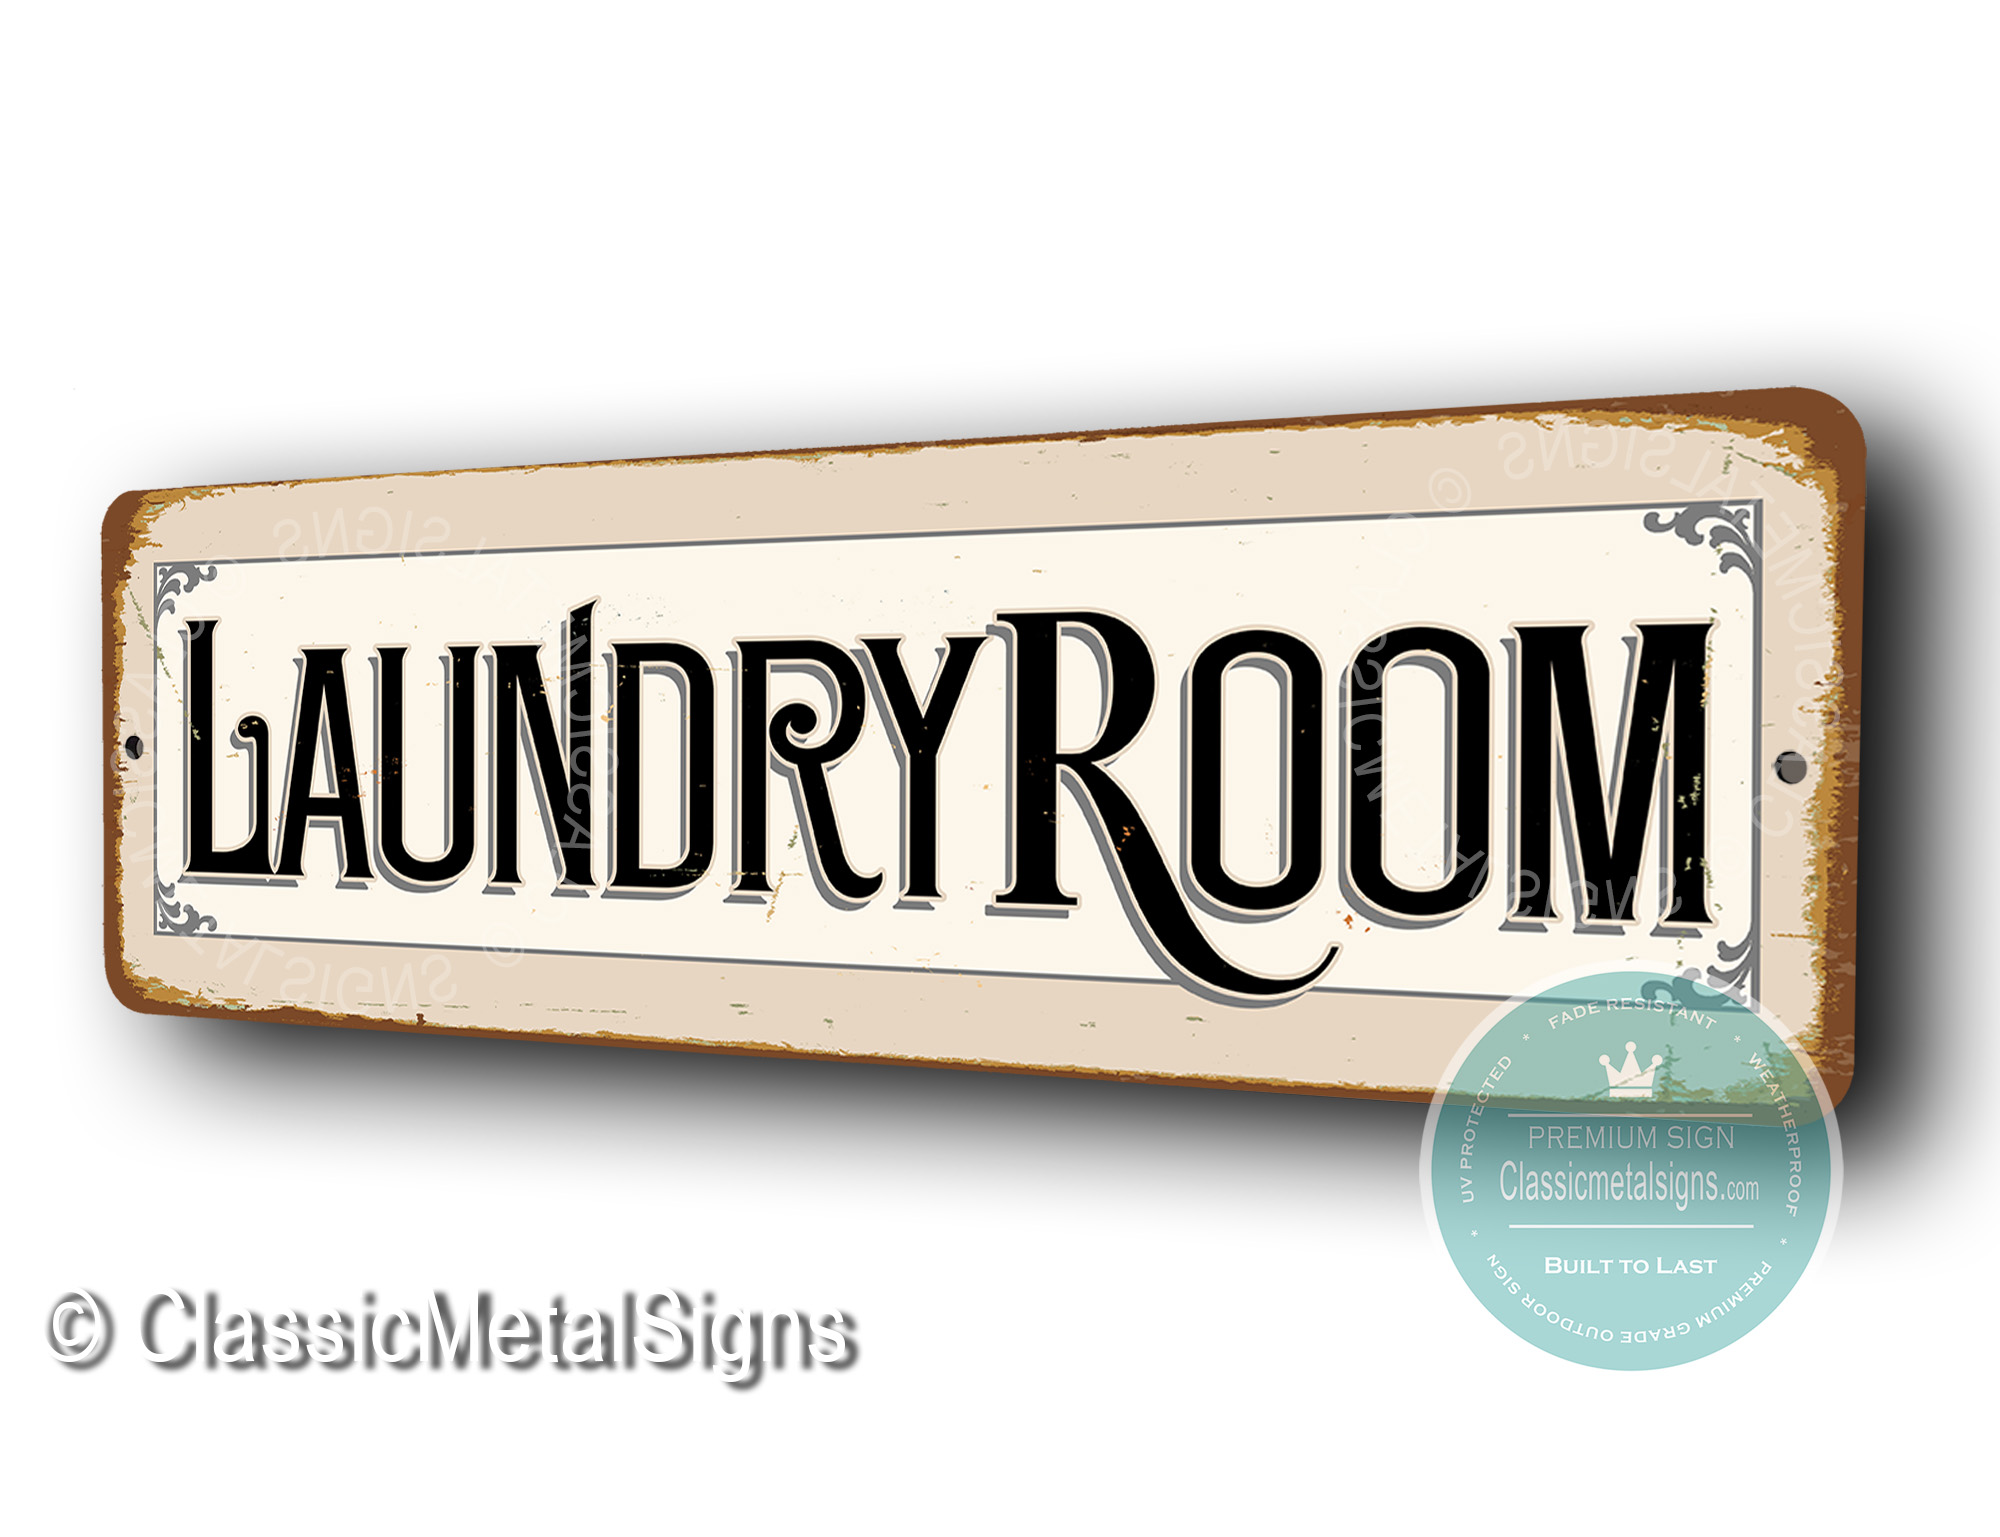 Laundry Room Signs